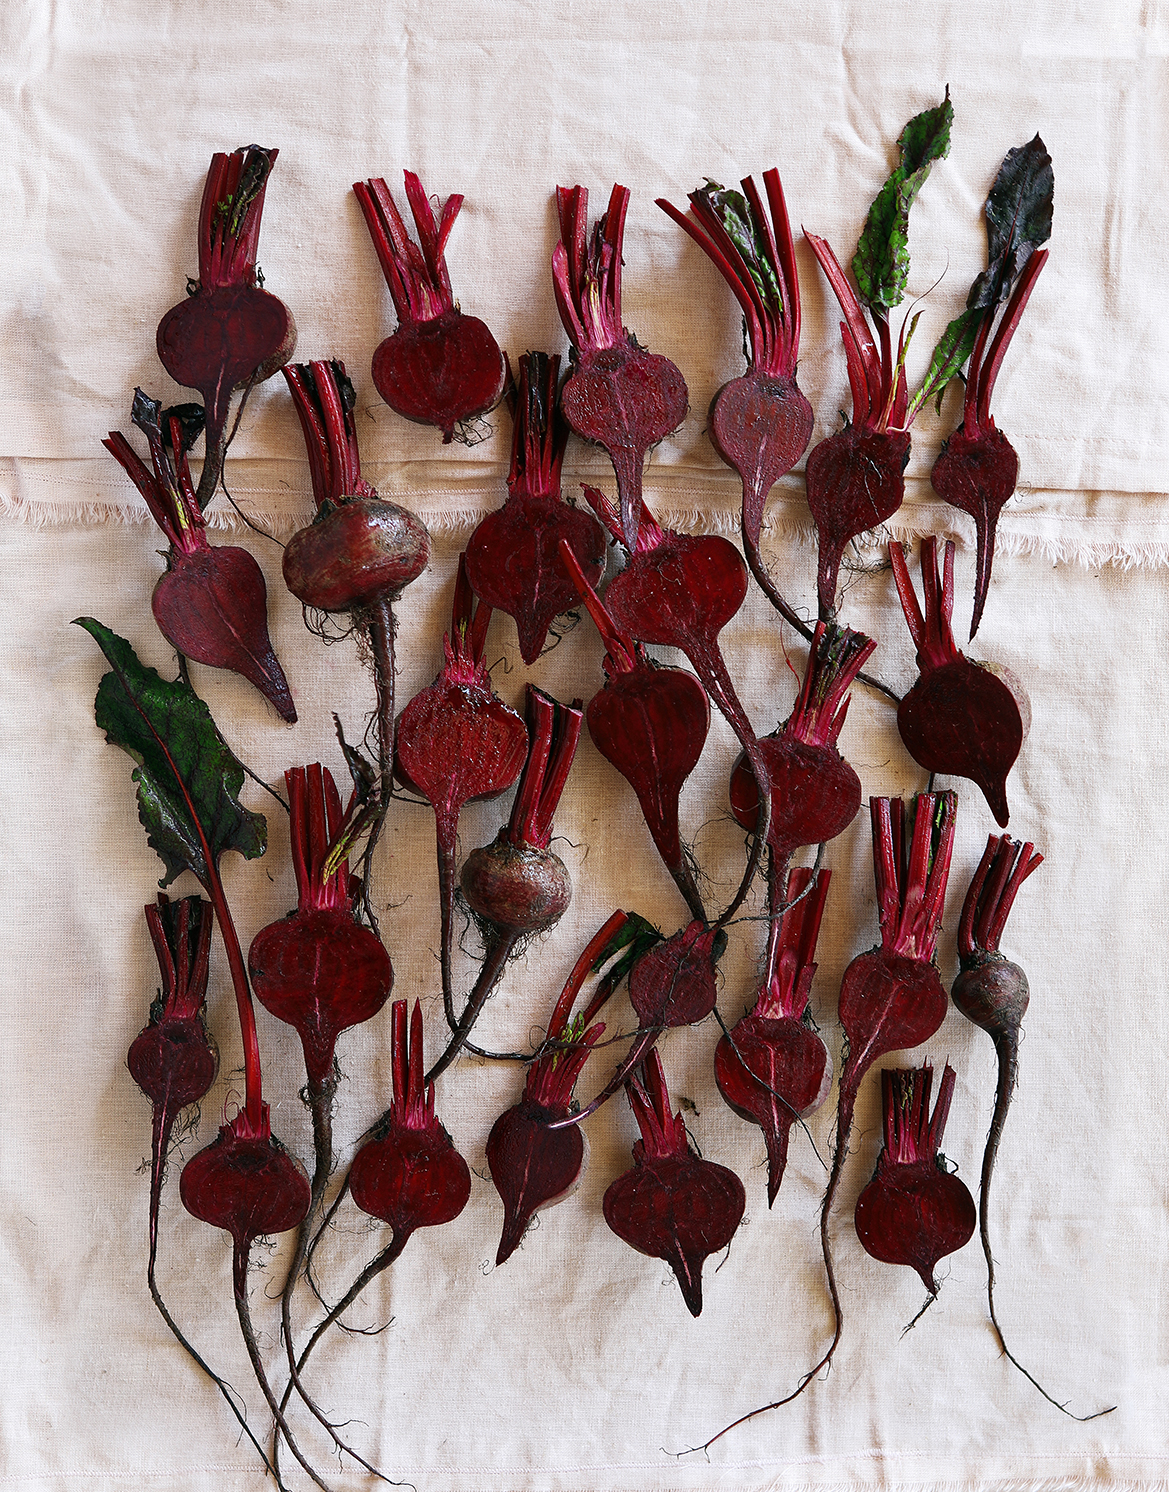 Beetroots_FINAL_003_Squarespace.jpg